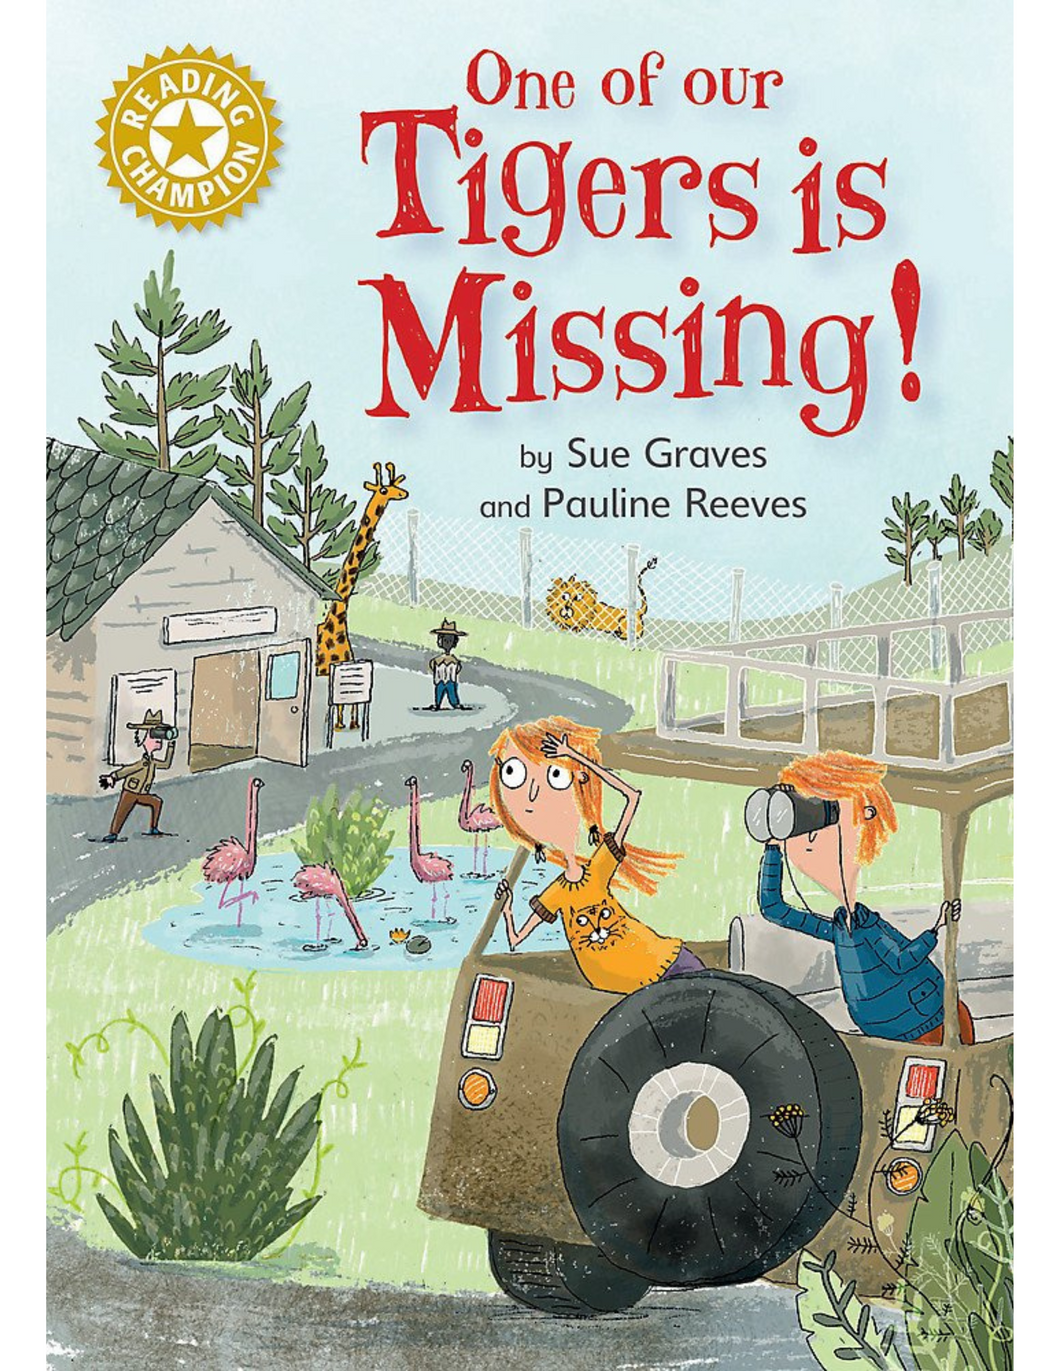 One of Our Tigers is Missing! (Gold 9)